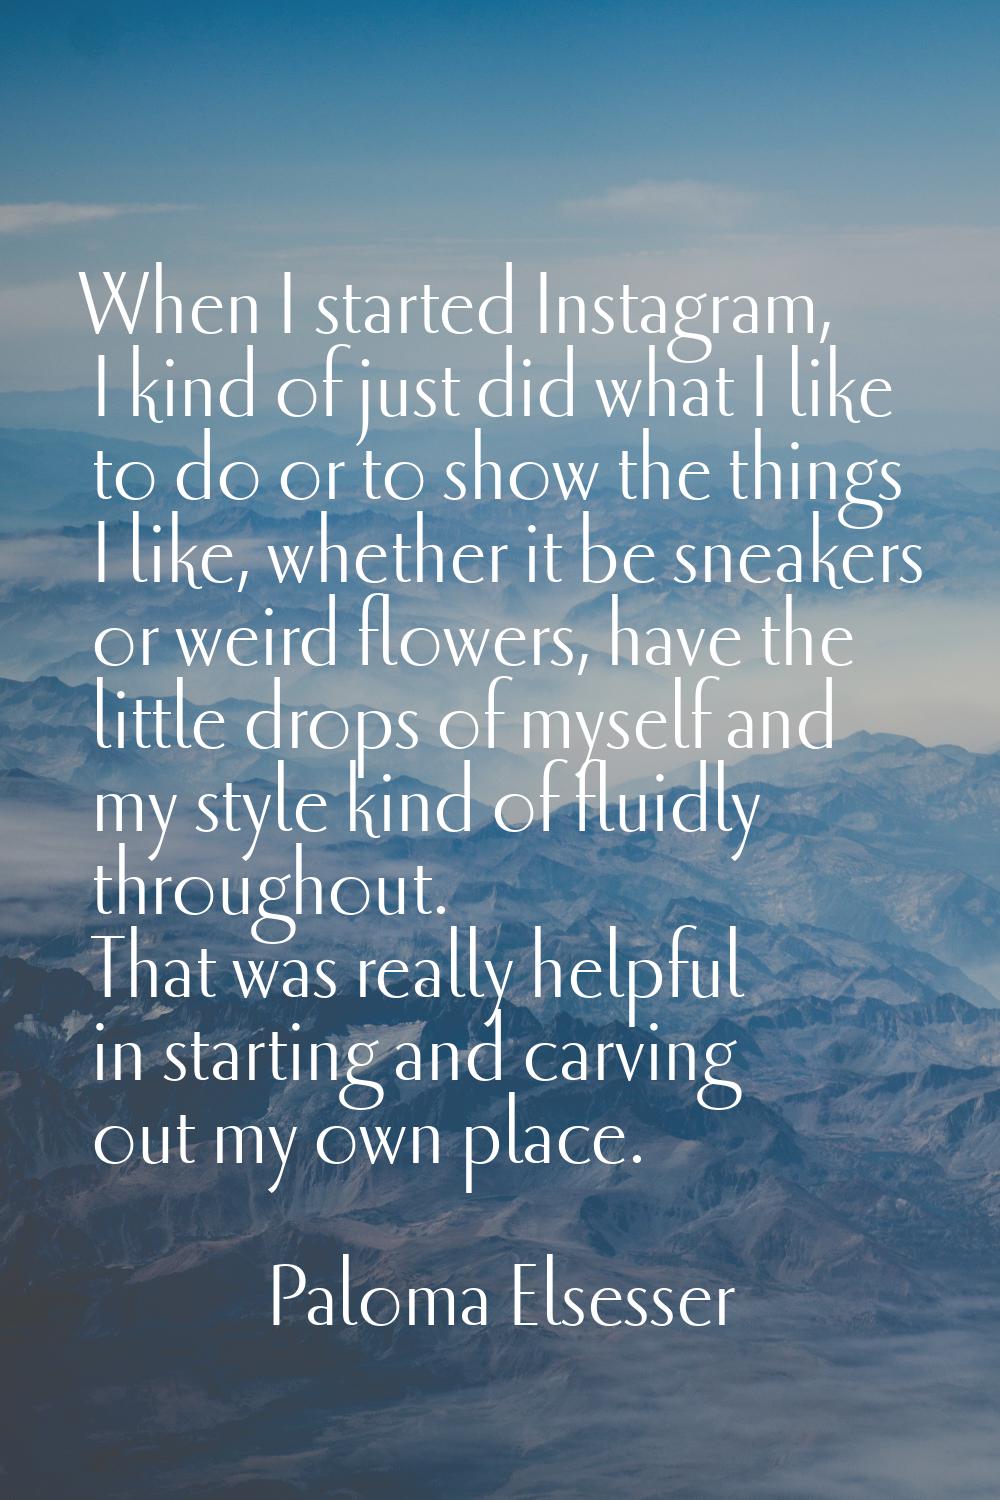 When I started Instagram, I kind of just did what I like to do or to show the things I like, whethe